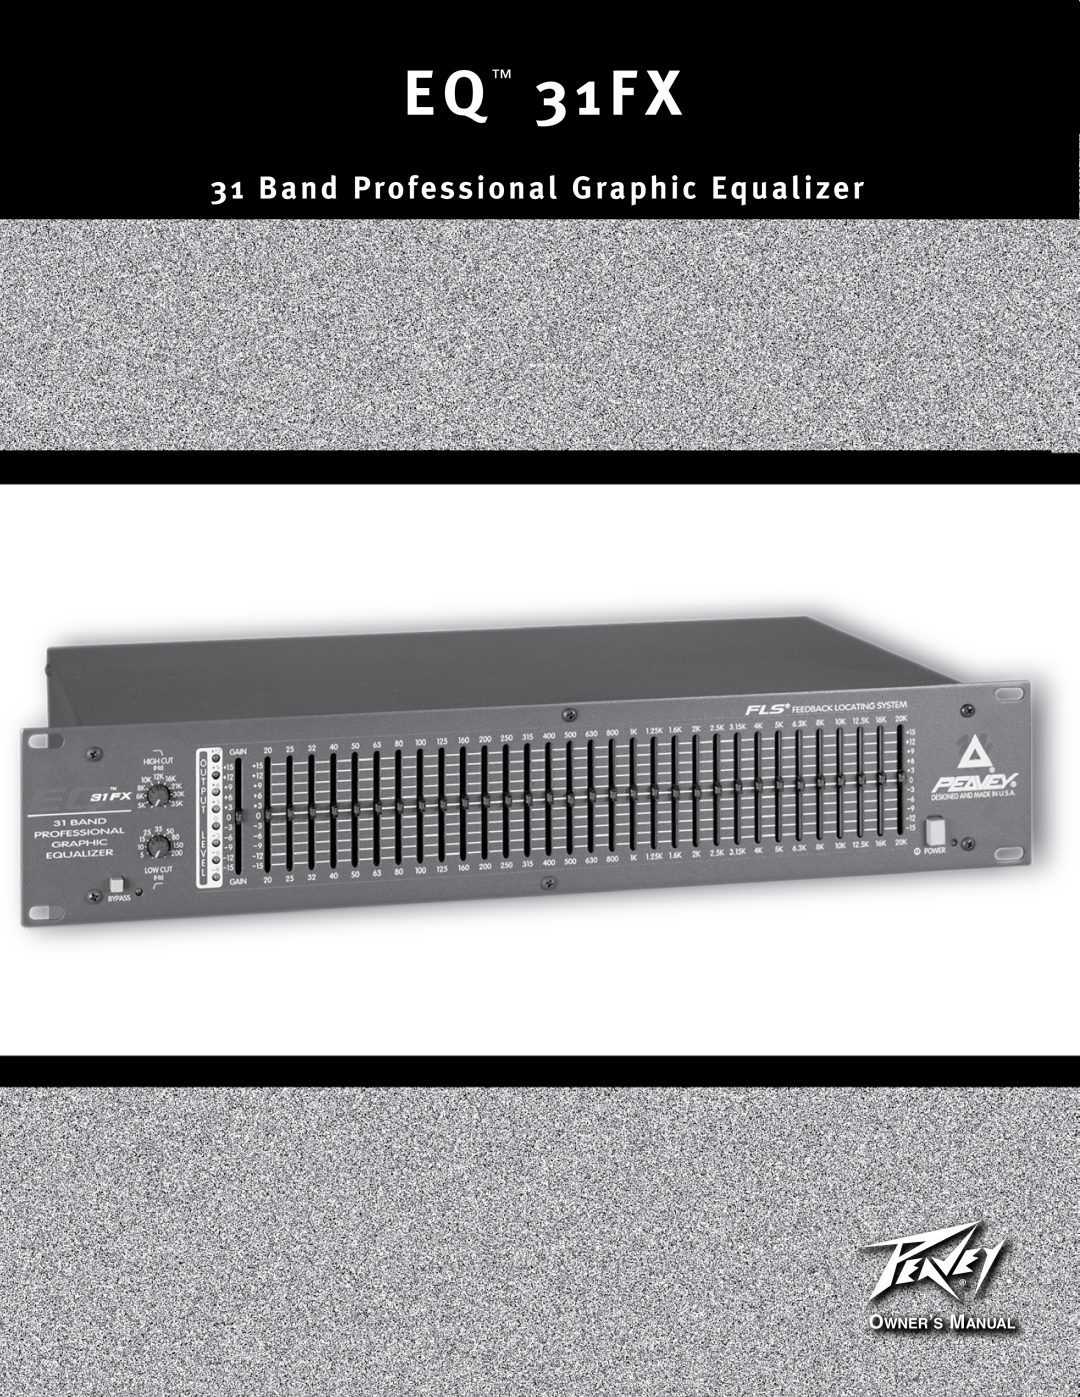 Peavey owner manual E Q 31FX, Band Professional Graphic Equalizer 